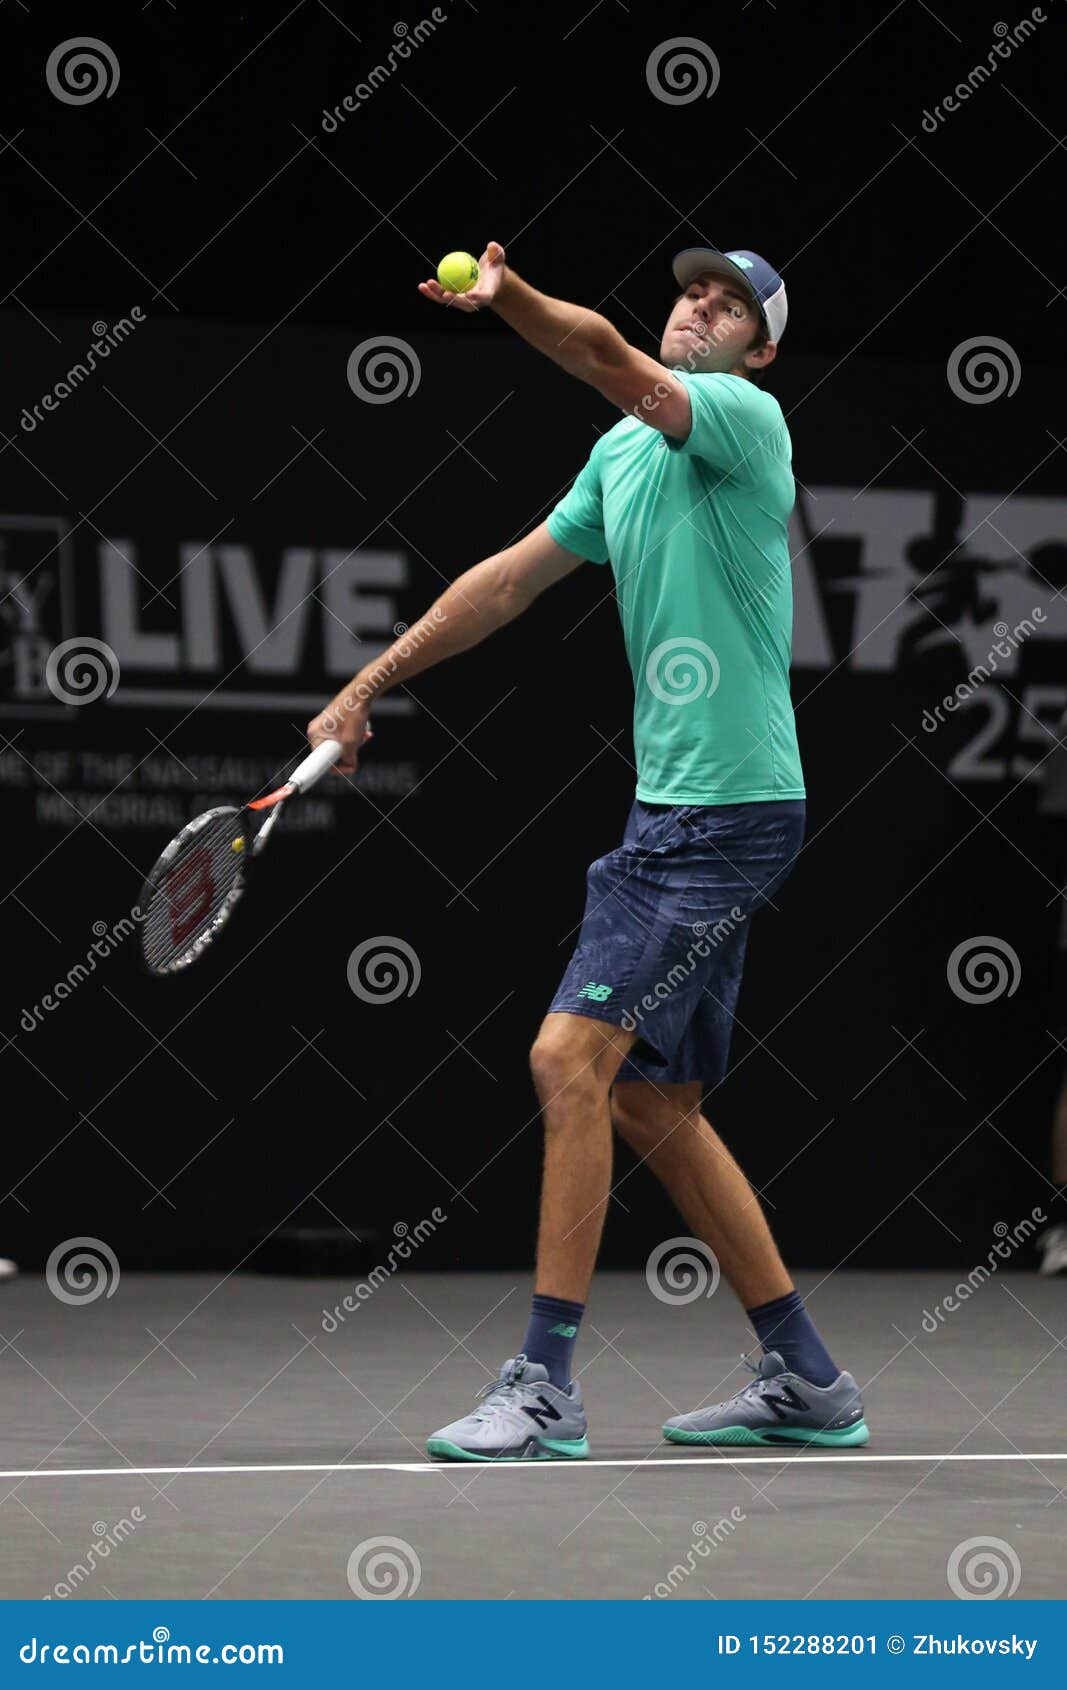 Professional Tennis Player Reilly Opelka of USA in Action during His Round of 16 Match at the 2019 New York Open Tennis Tournament Editorial Photo